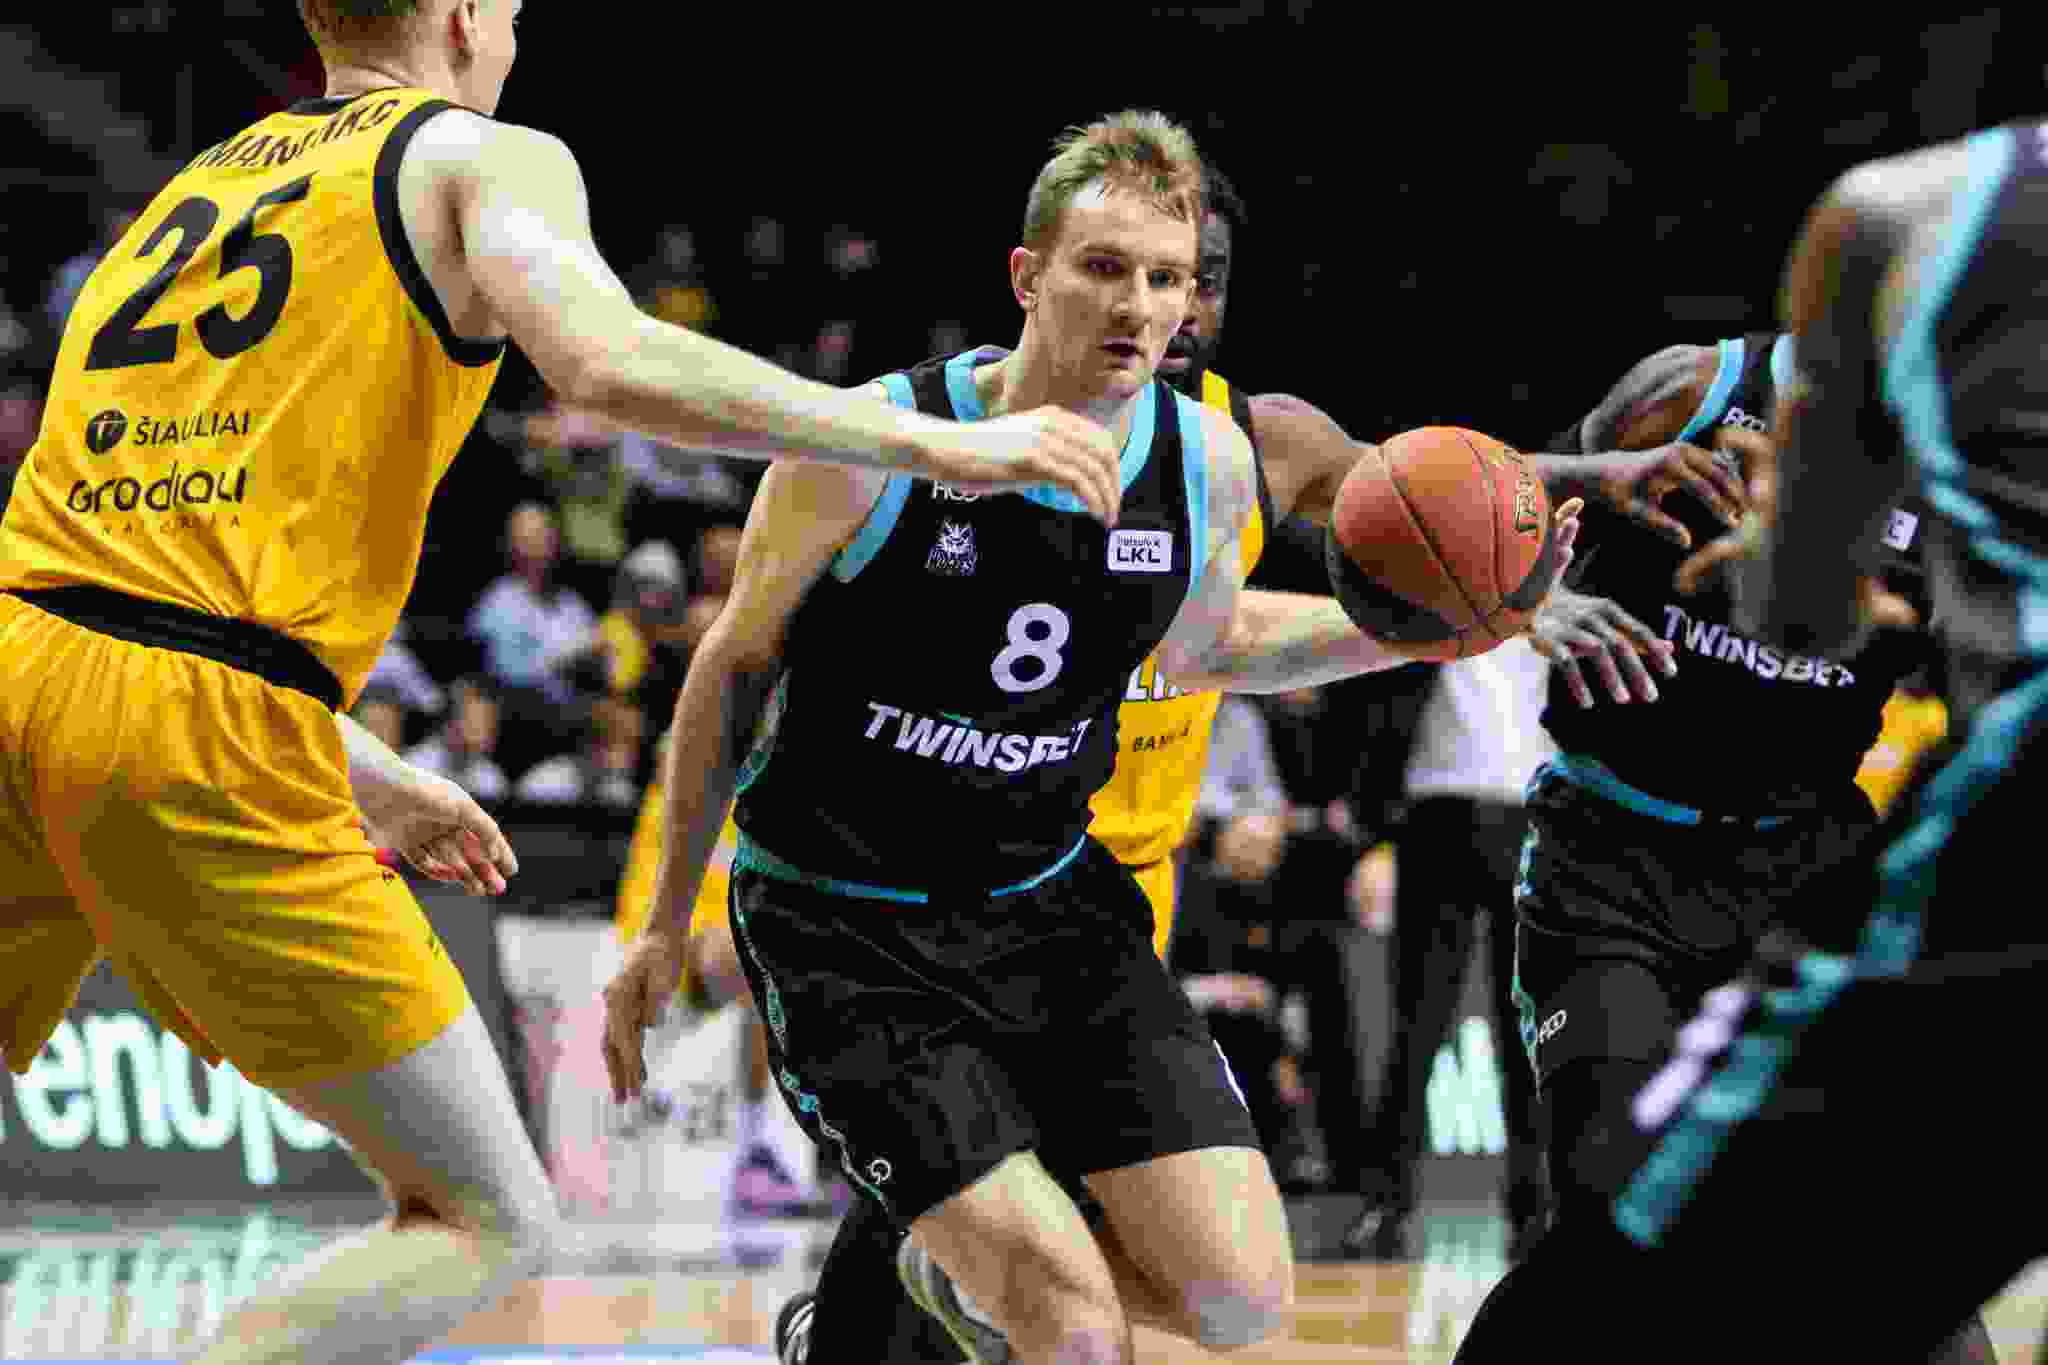 Wolves Twinsbet stroll to easy win in Šiauliai